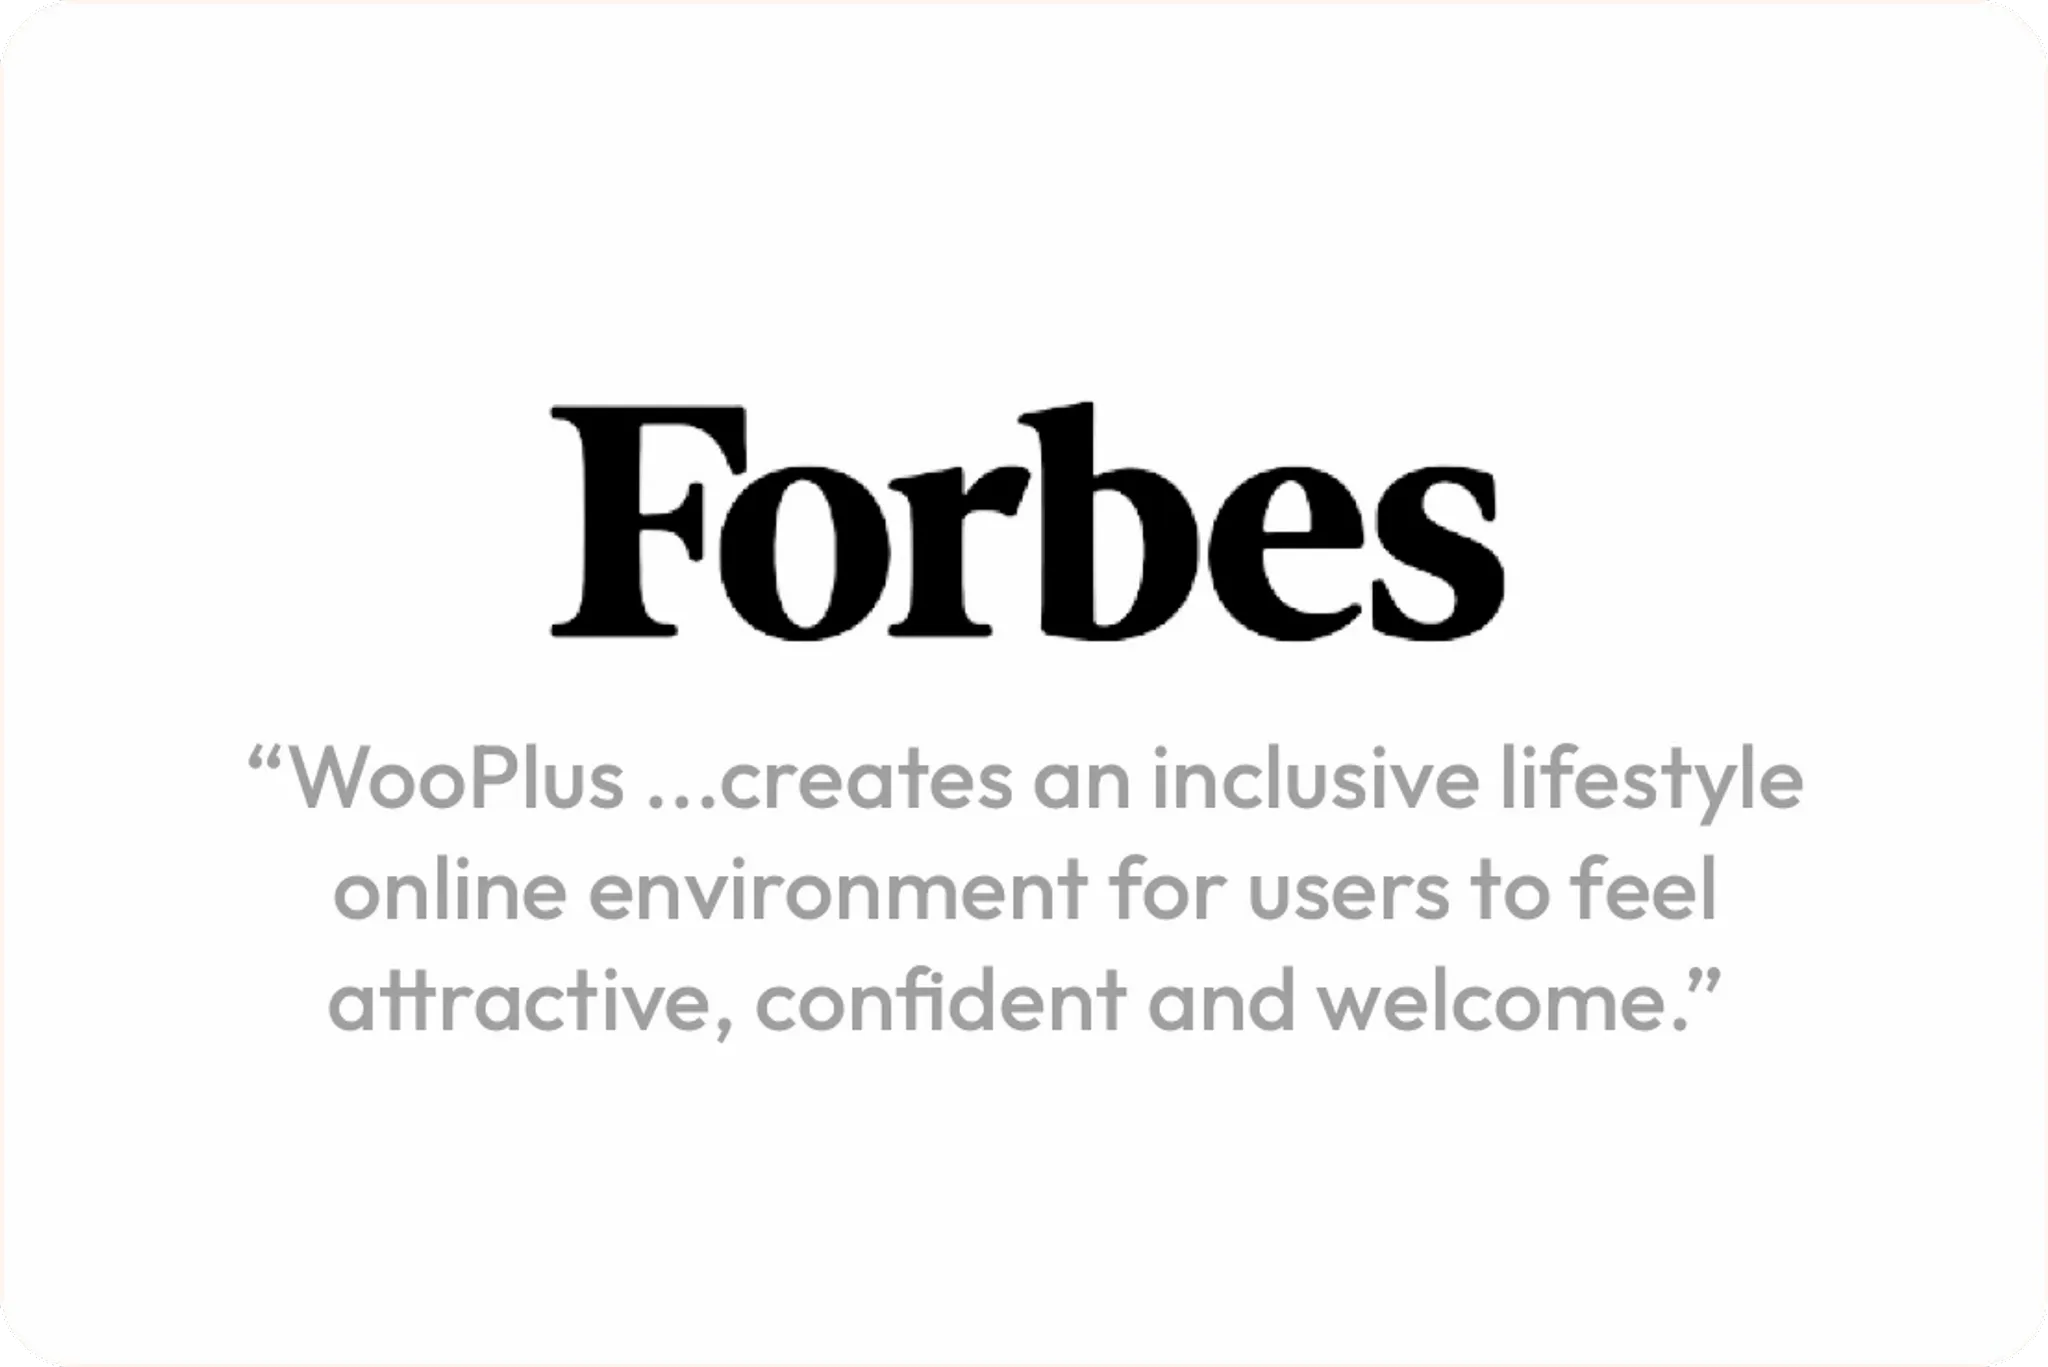 https://www.forbes.com/sites/johnscottlewinski/2020/11/30/social-media-app-wooplus-takes-plus-size-dating-to-europe/?sh=616e8a5869db